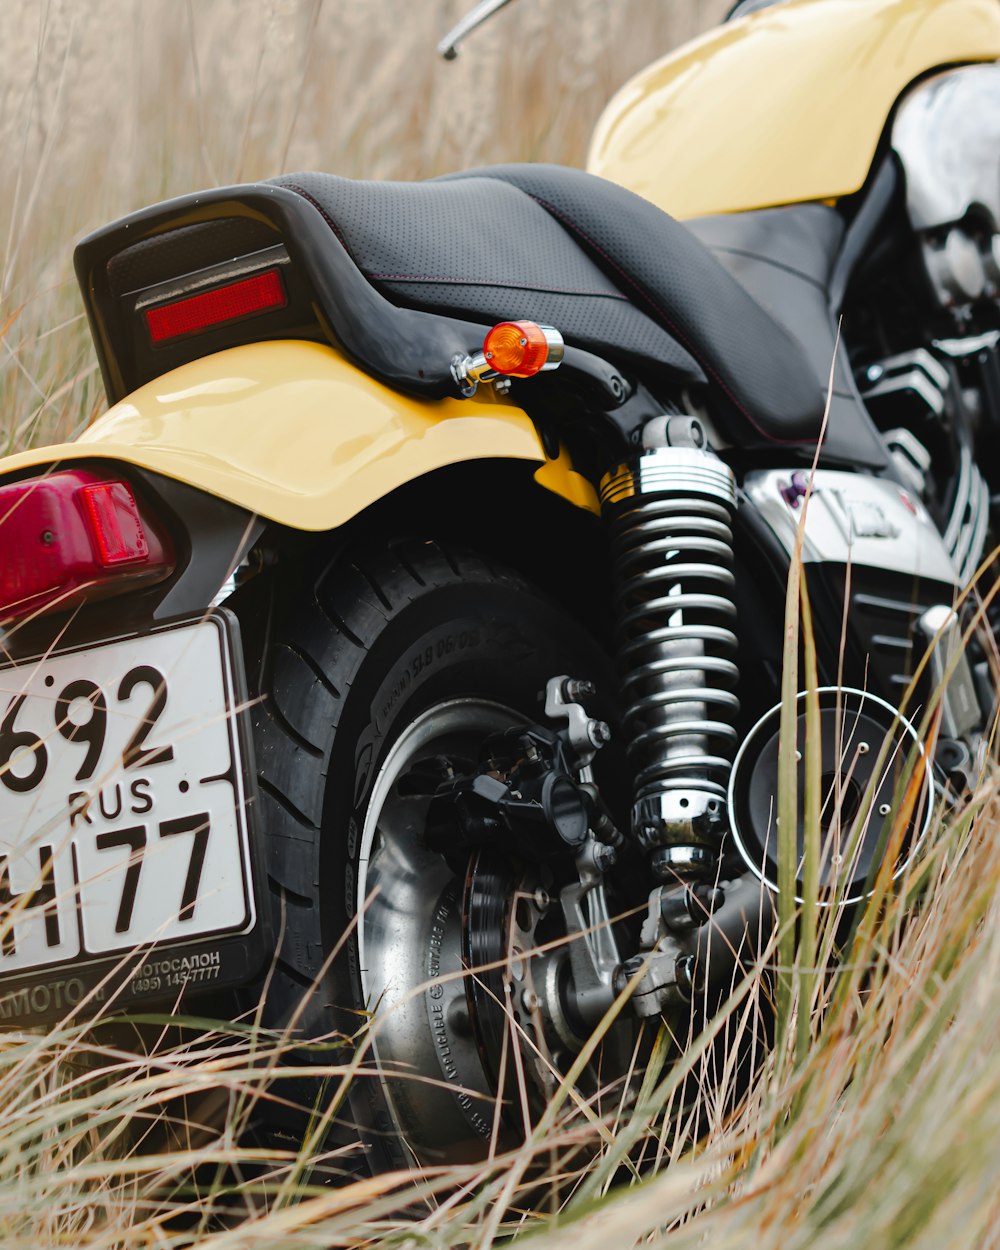 yellow motorcycle on grass field